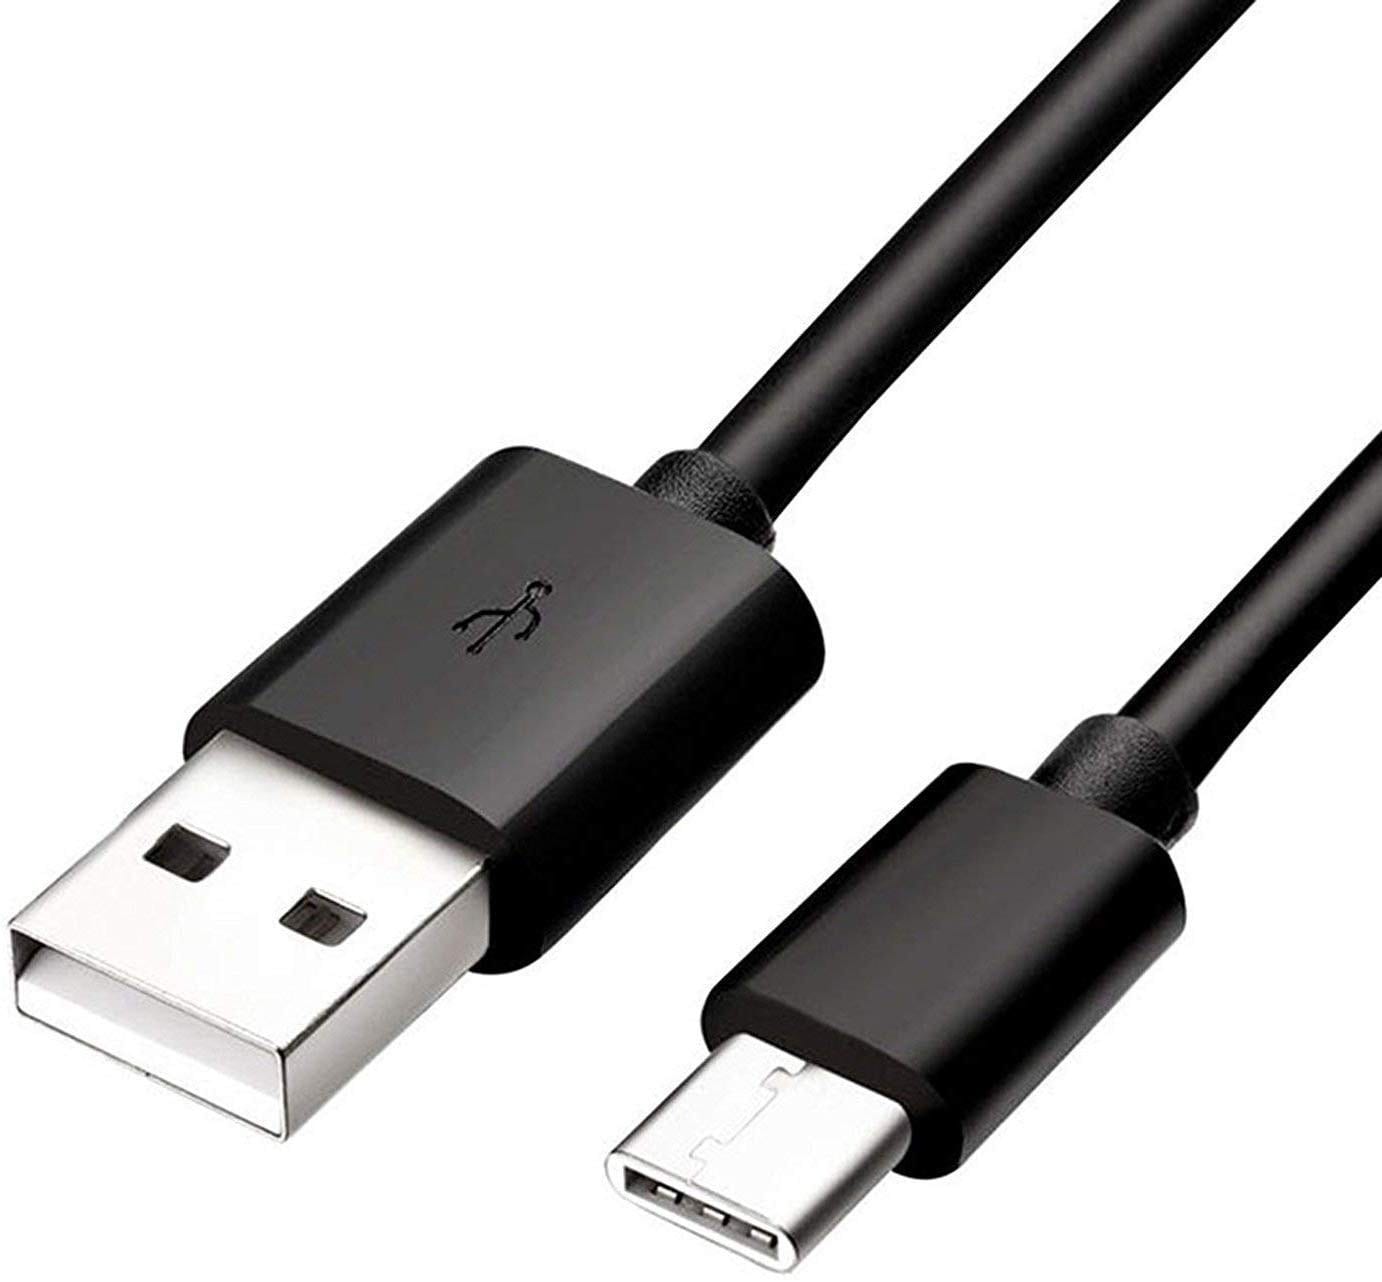 Samsung Galaxy A70 USB Cable Type C Charging Cable Lead Black - 3M - SmartPhoneGadgetUK